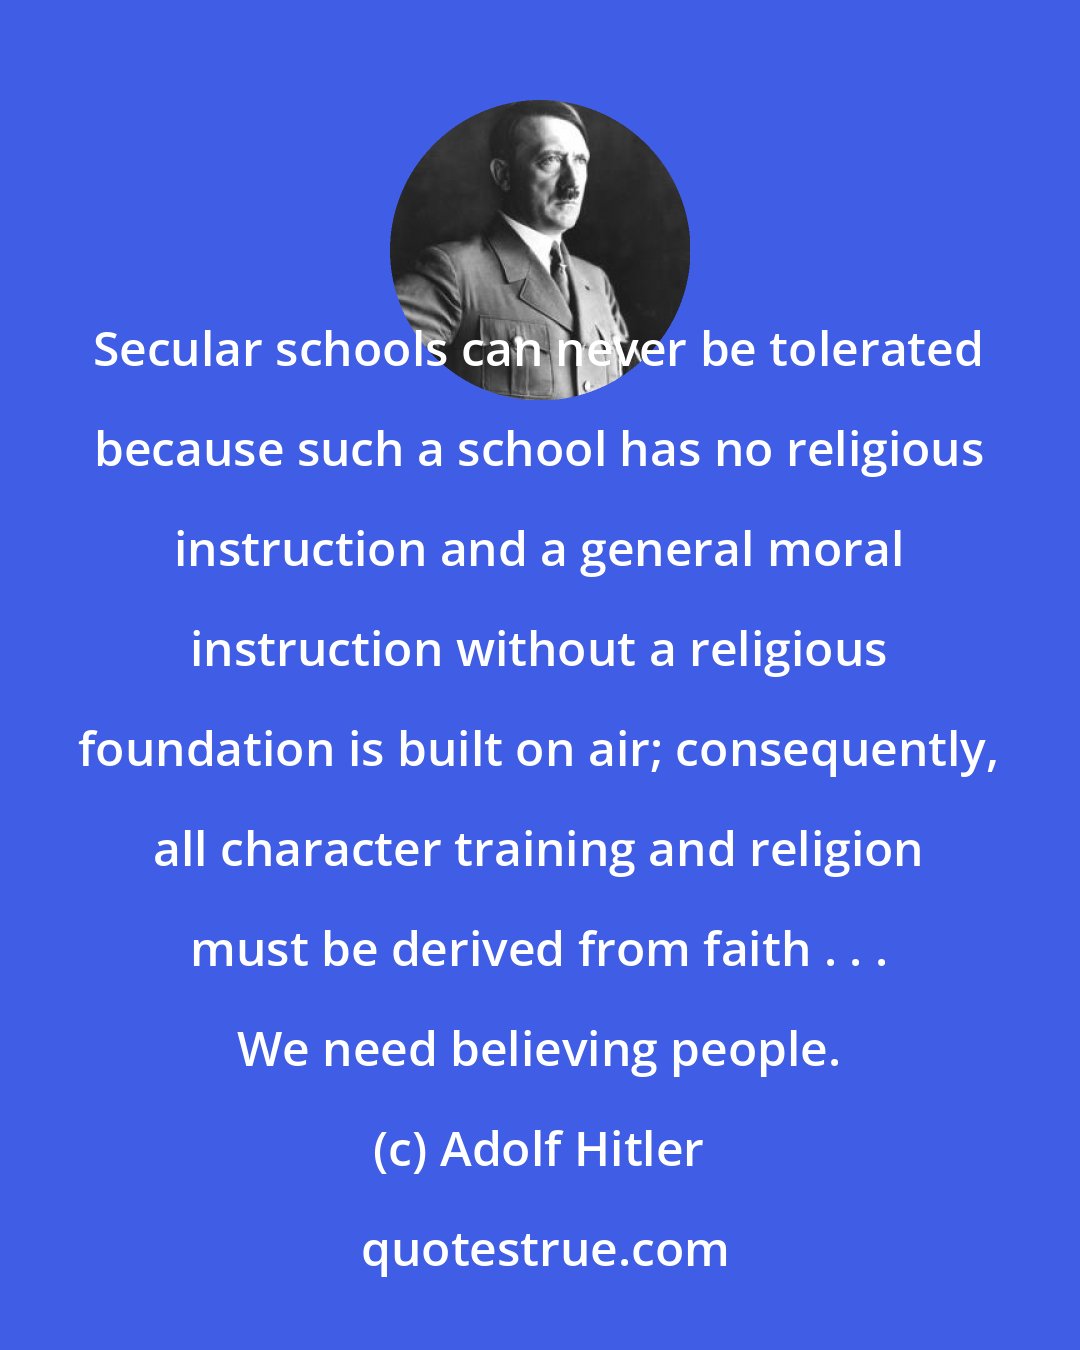 Adolf Hitler: Secular schools can never be tolerated because such a school has no religious instruction and a general moral instruction without a religious foundation is built on air; consequently, all character training and religion must be derived from faith . . .﻿ We need believing people.